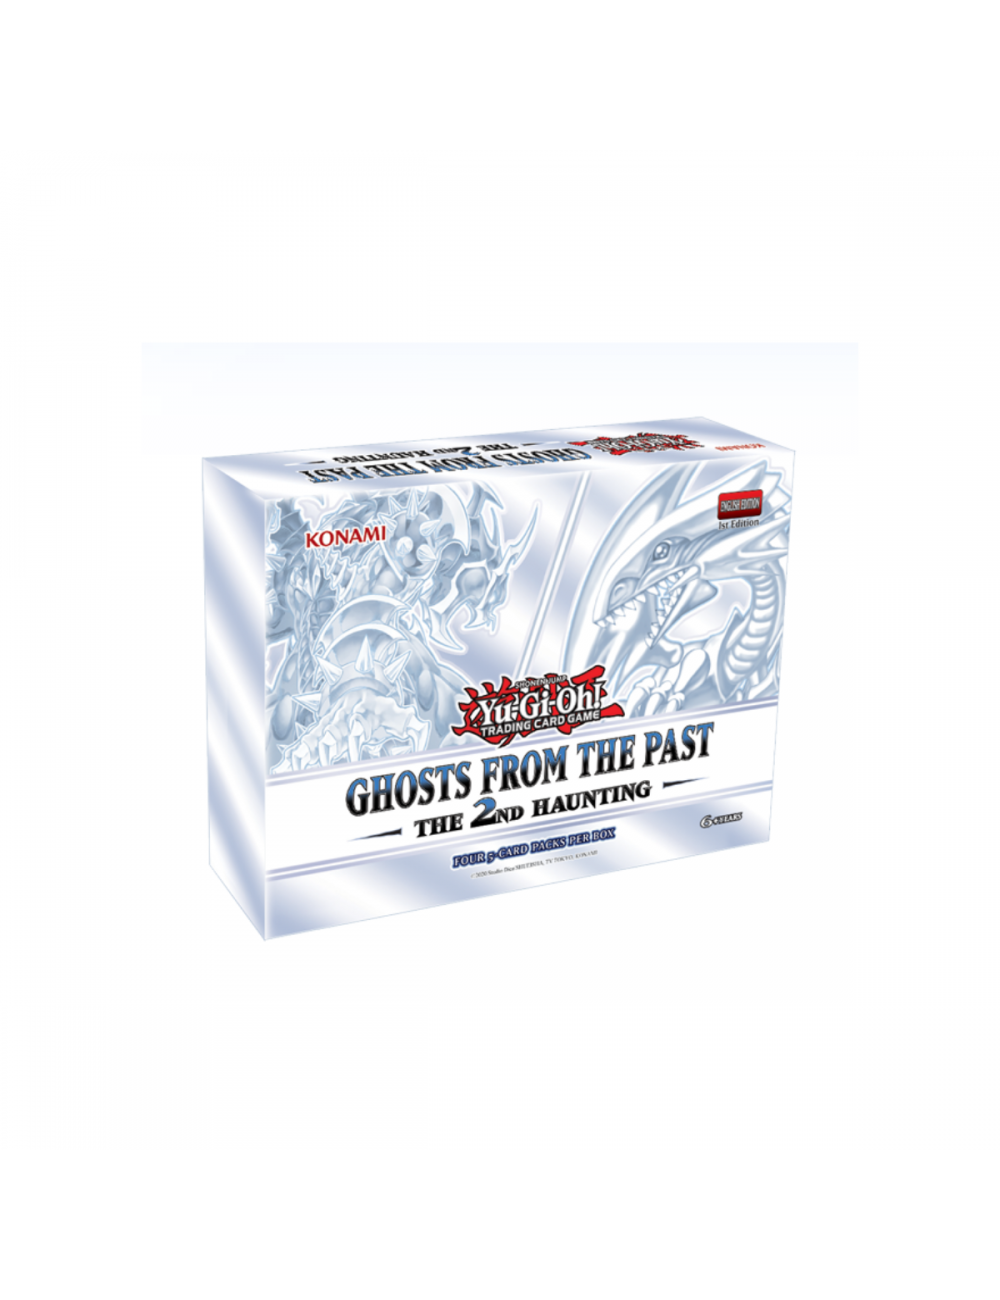 Ghosts From the Past Box 2022 YGI-717856255  Konami